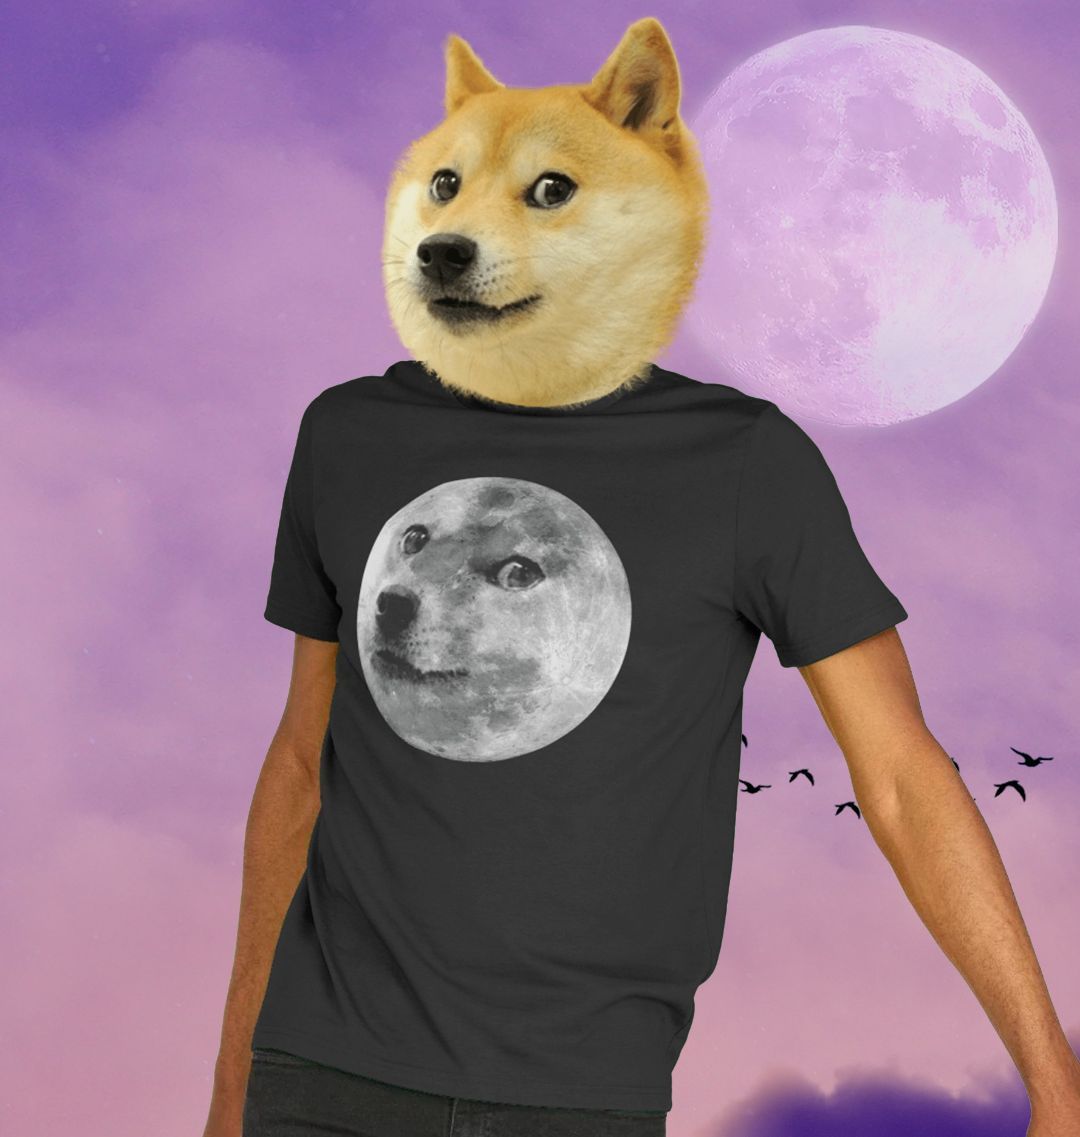 To The Moon T-shirt